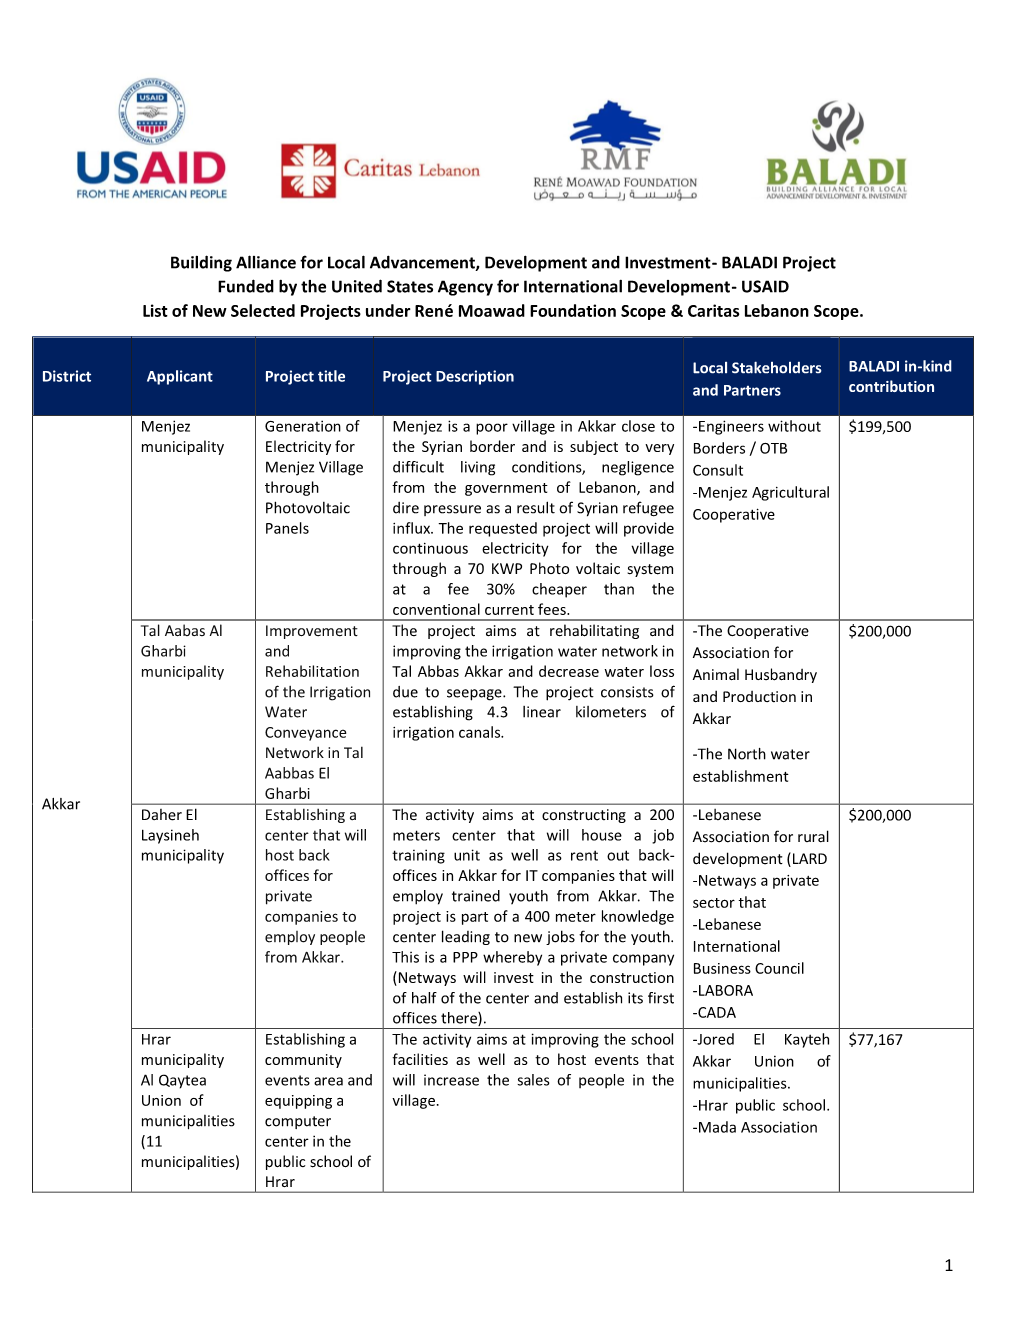 BALADI Project Funded by the United States Agency For